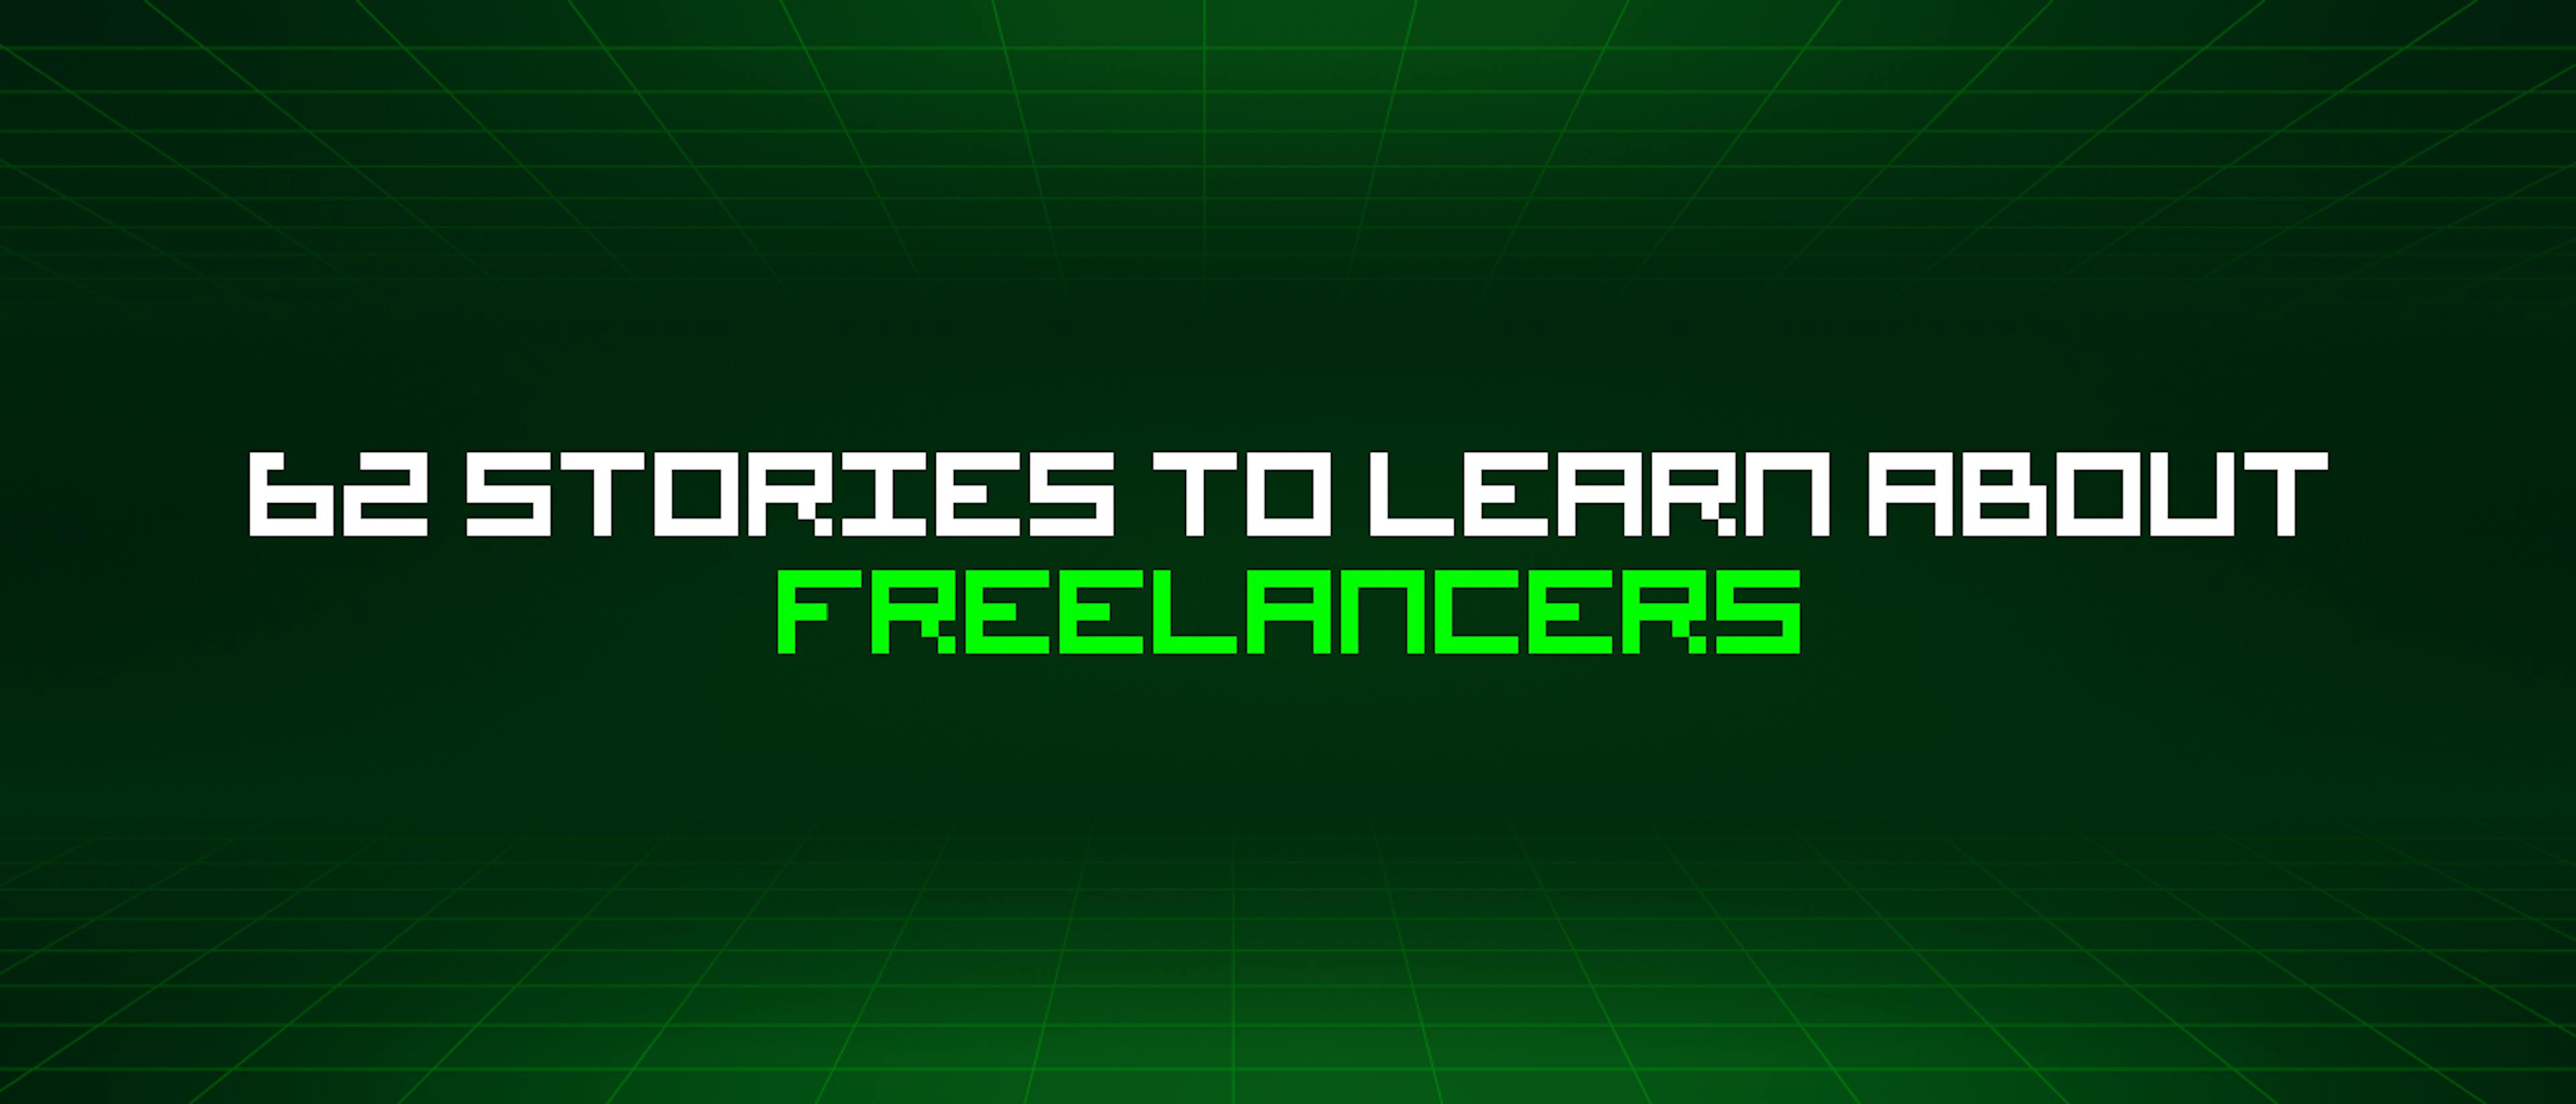 featured image - 62 Stories To Learn About Freelancers